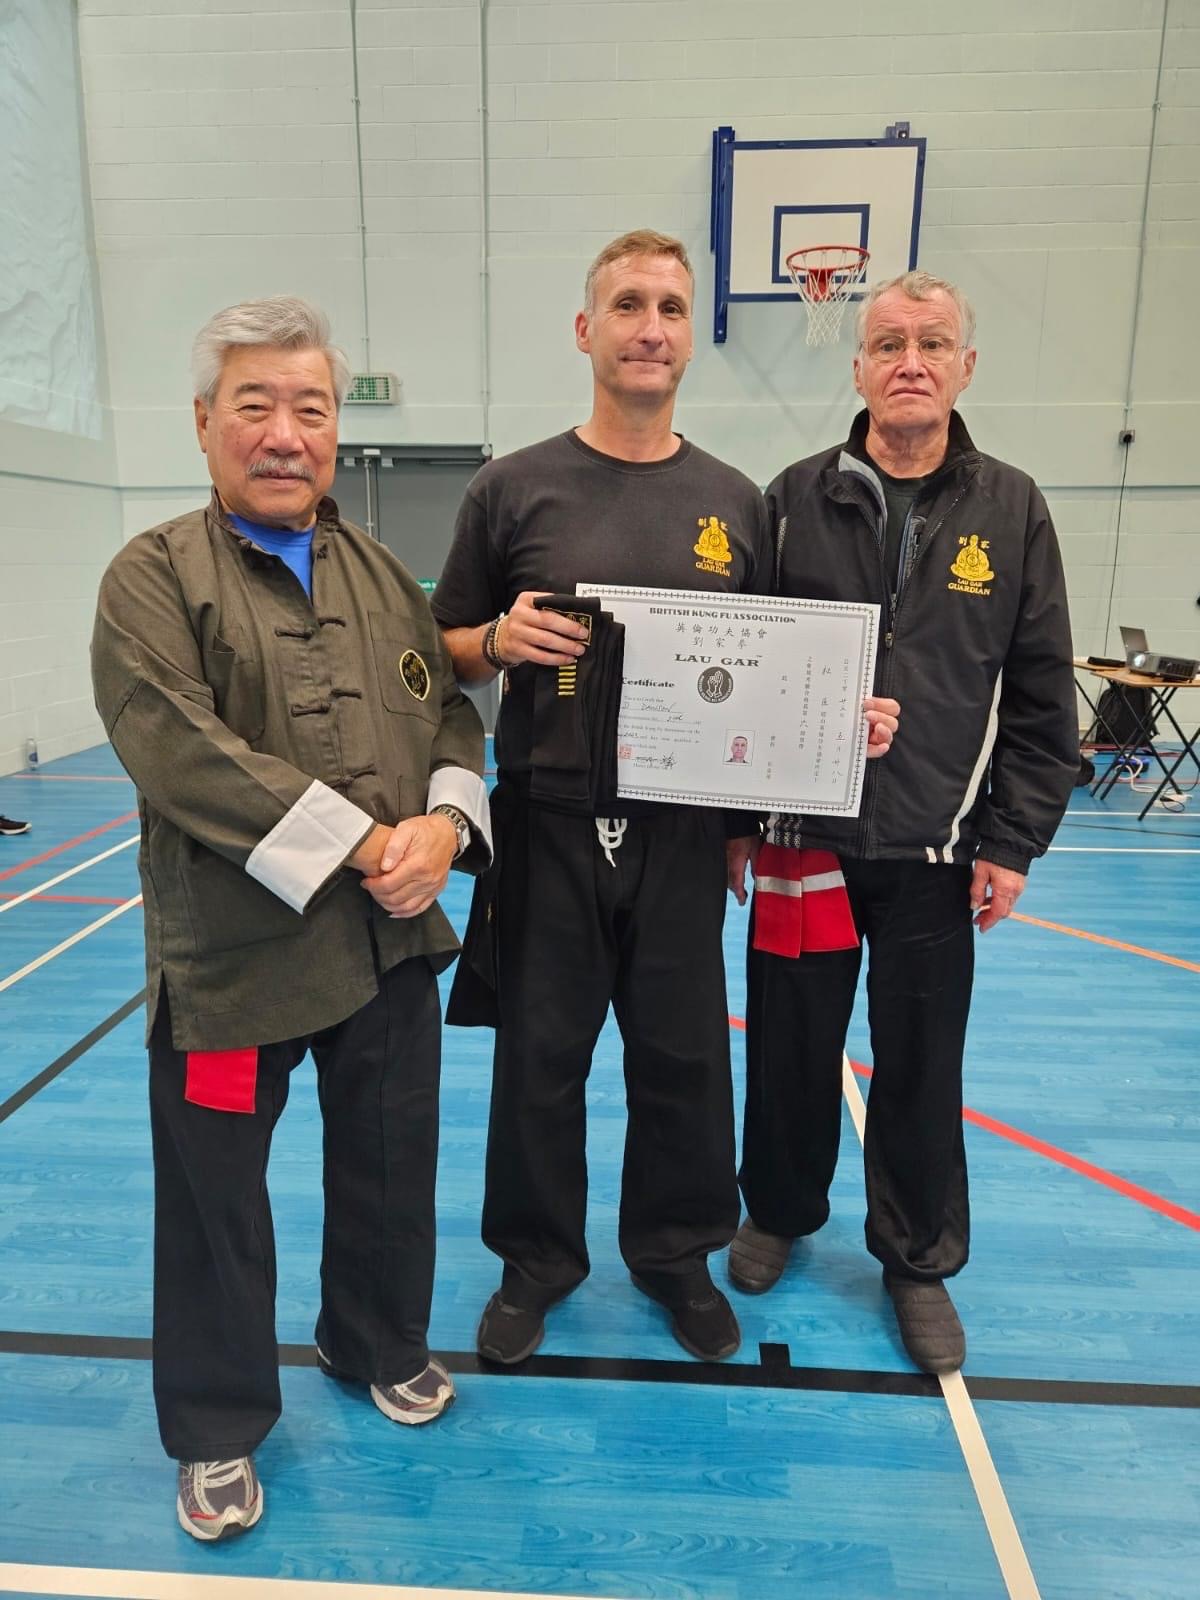 Our Sifu and Guardian Derek Dawson receiving his 6th Degree Black Sash and Certificate from Grand Master Yau and Master Russell.